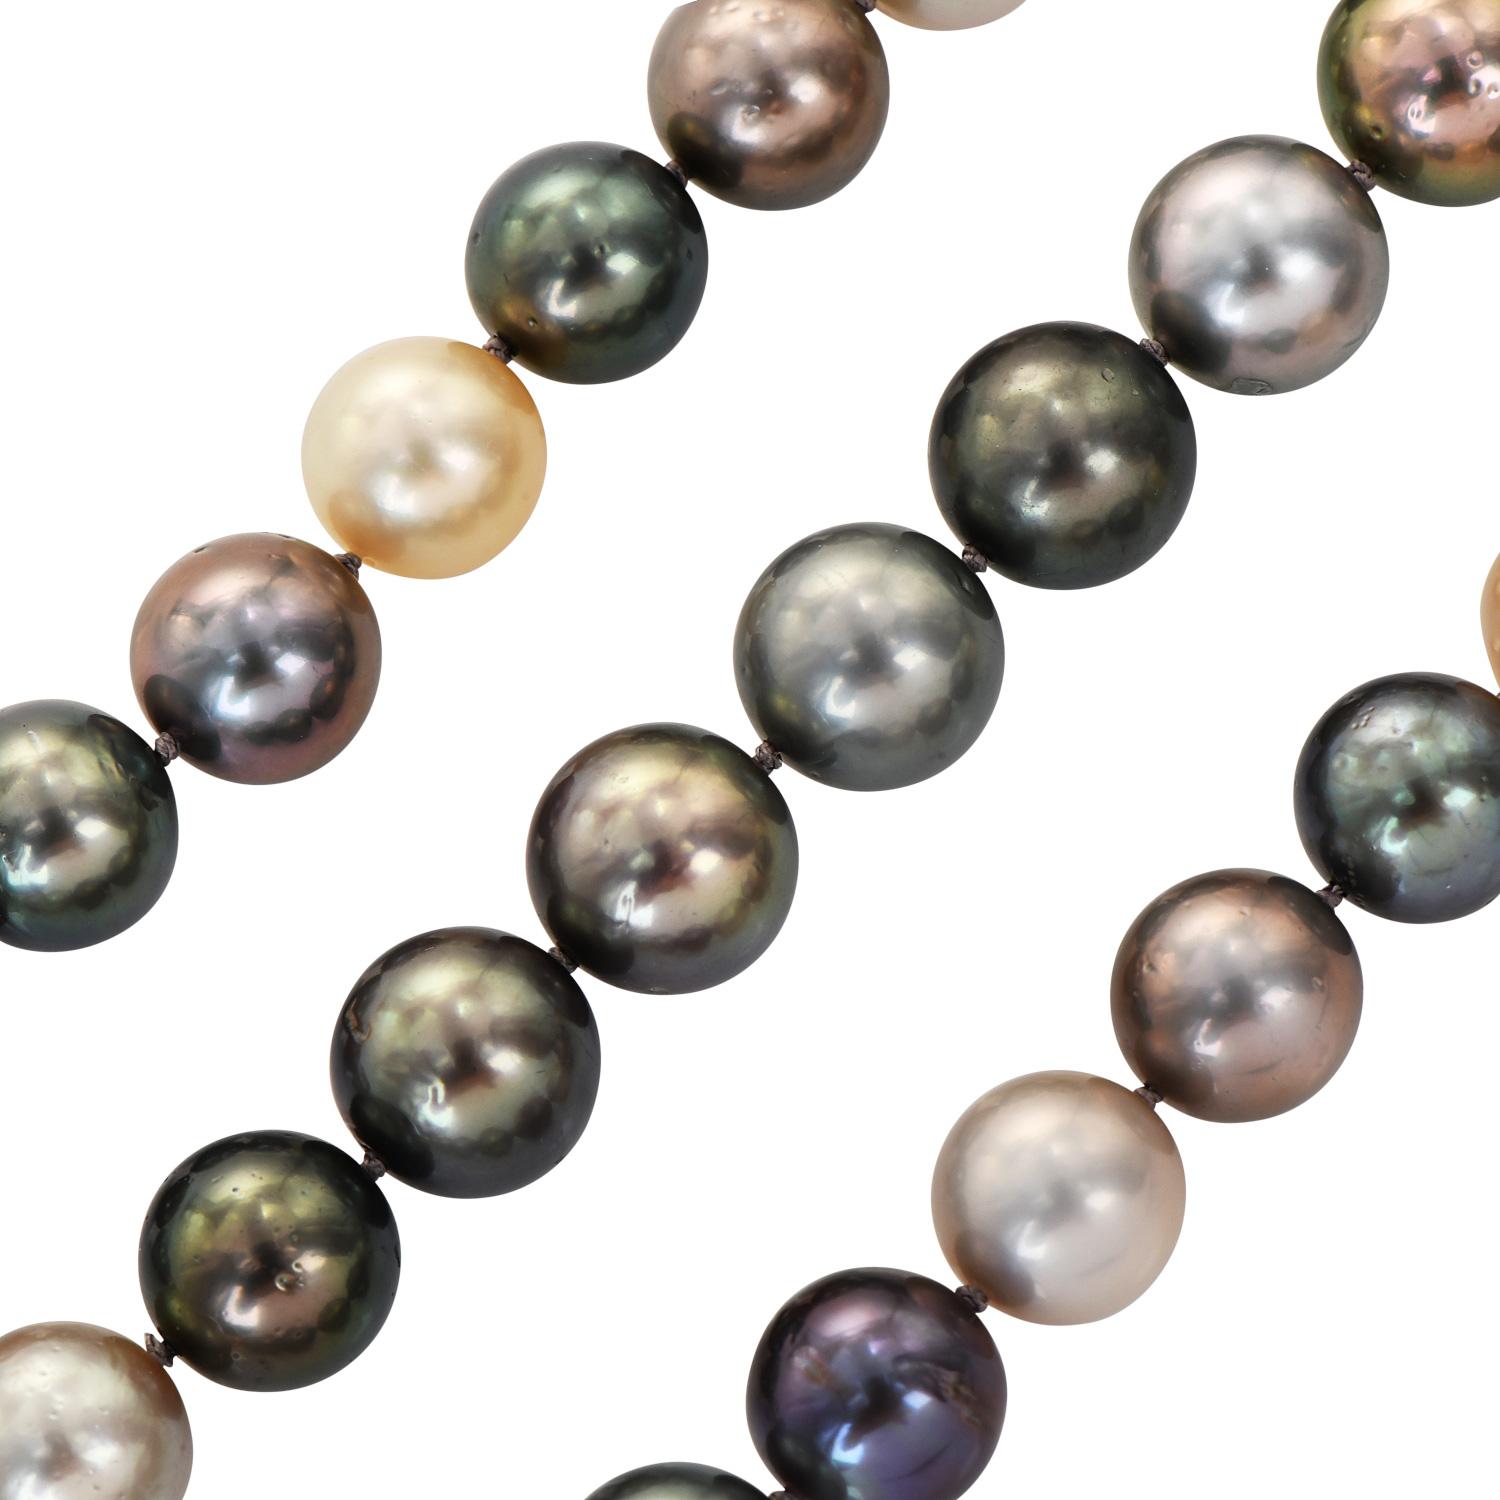 A long strand of High lustrous Tahitian & Golden South Sea Pearls of uniform 12 mm.

A multicolor dance of black, gray, peacock, silver & golden pearls makes this necklace a unique match of beauty and glamour.

The circular two-tone clasp is crafted